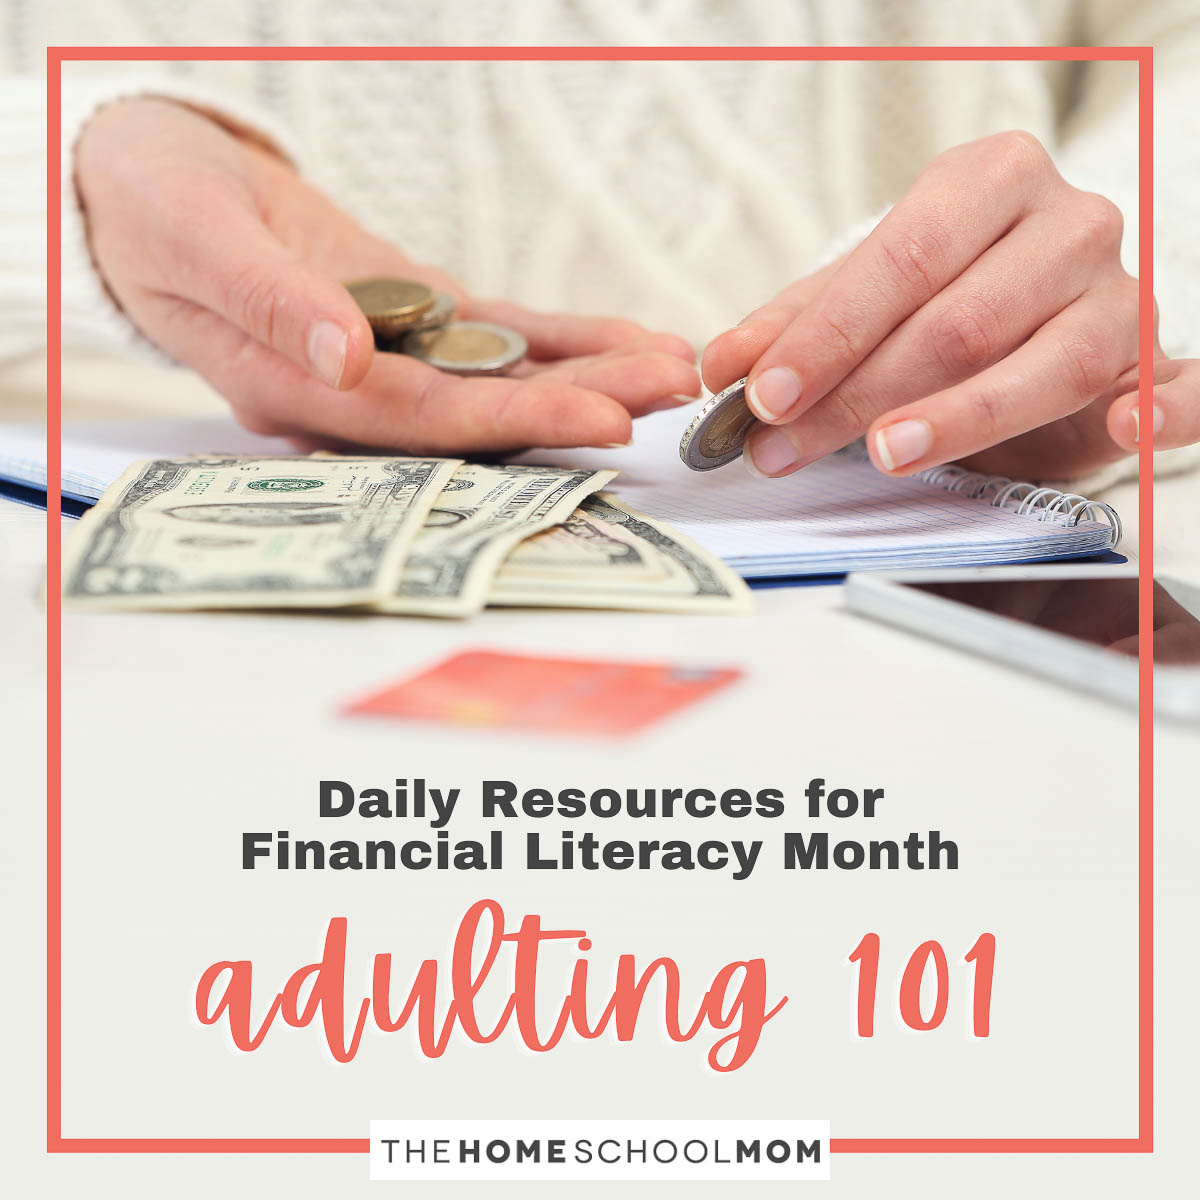 Daily Resources for Financial Literacy Month - Adulting 101.